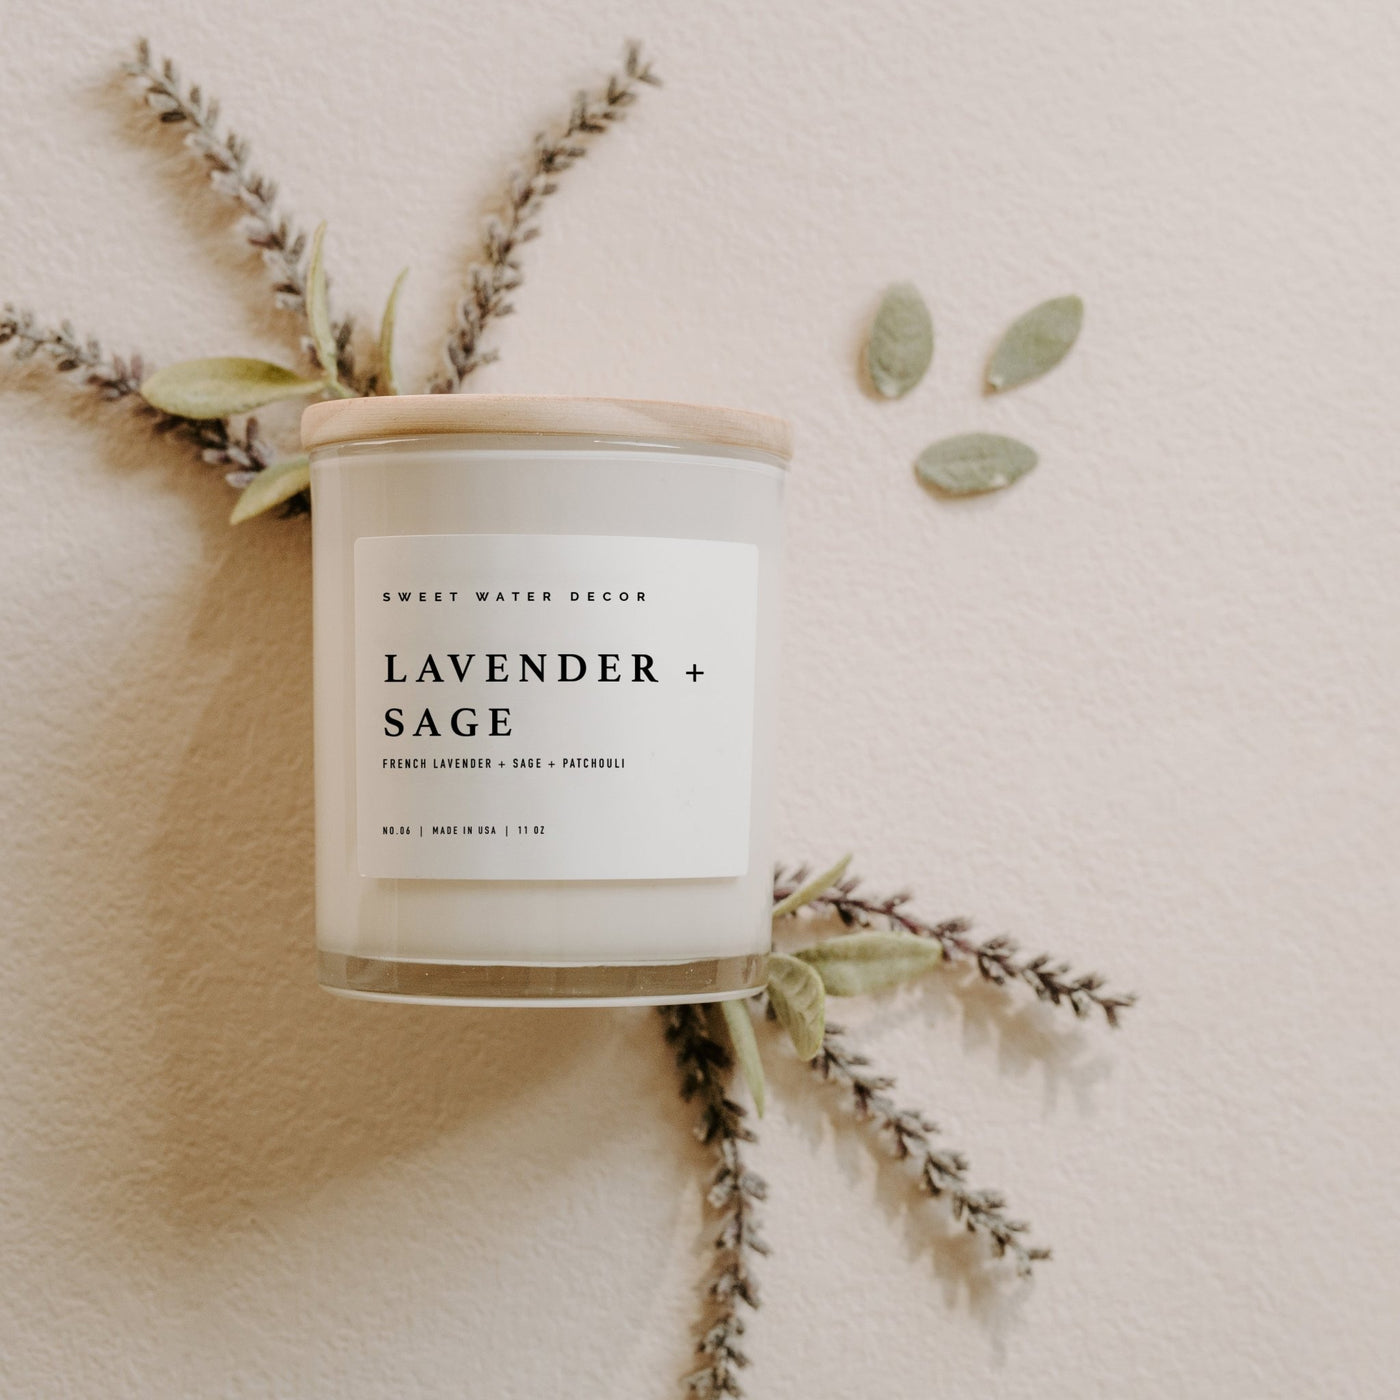 Lavender and Sage Soy Candle - White Jar - 11 oz - Sweet Water Decor - Candles